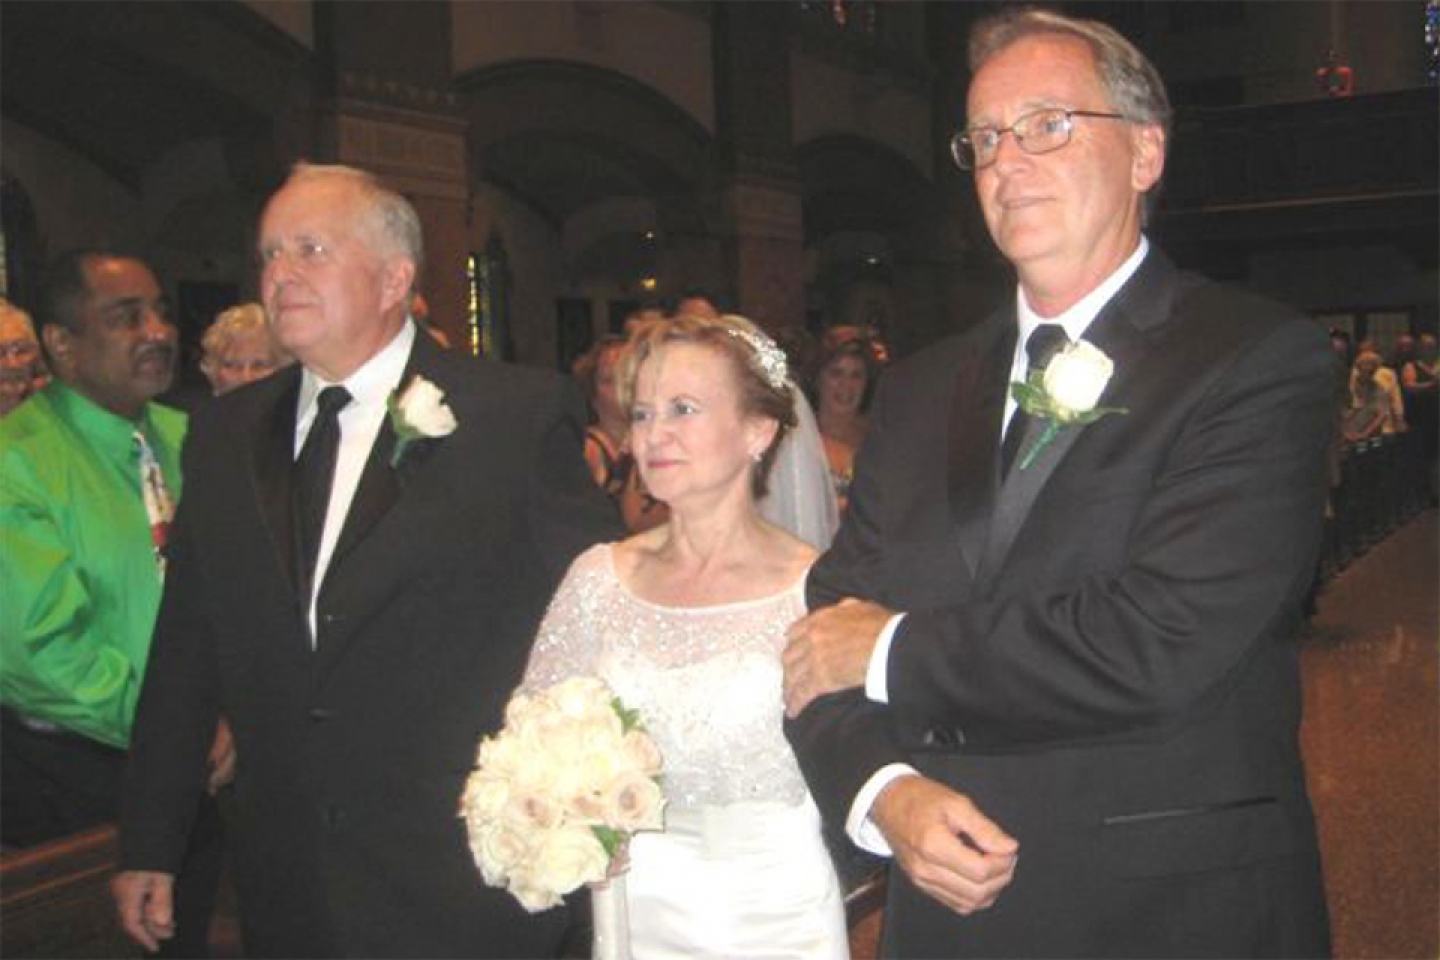 Wedding photo of Weill Cornell Medicine patient Dorothy Shelley, who walked down the aisle with her brother, 30 years after he donated a kidney to save her life.